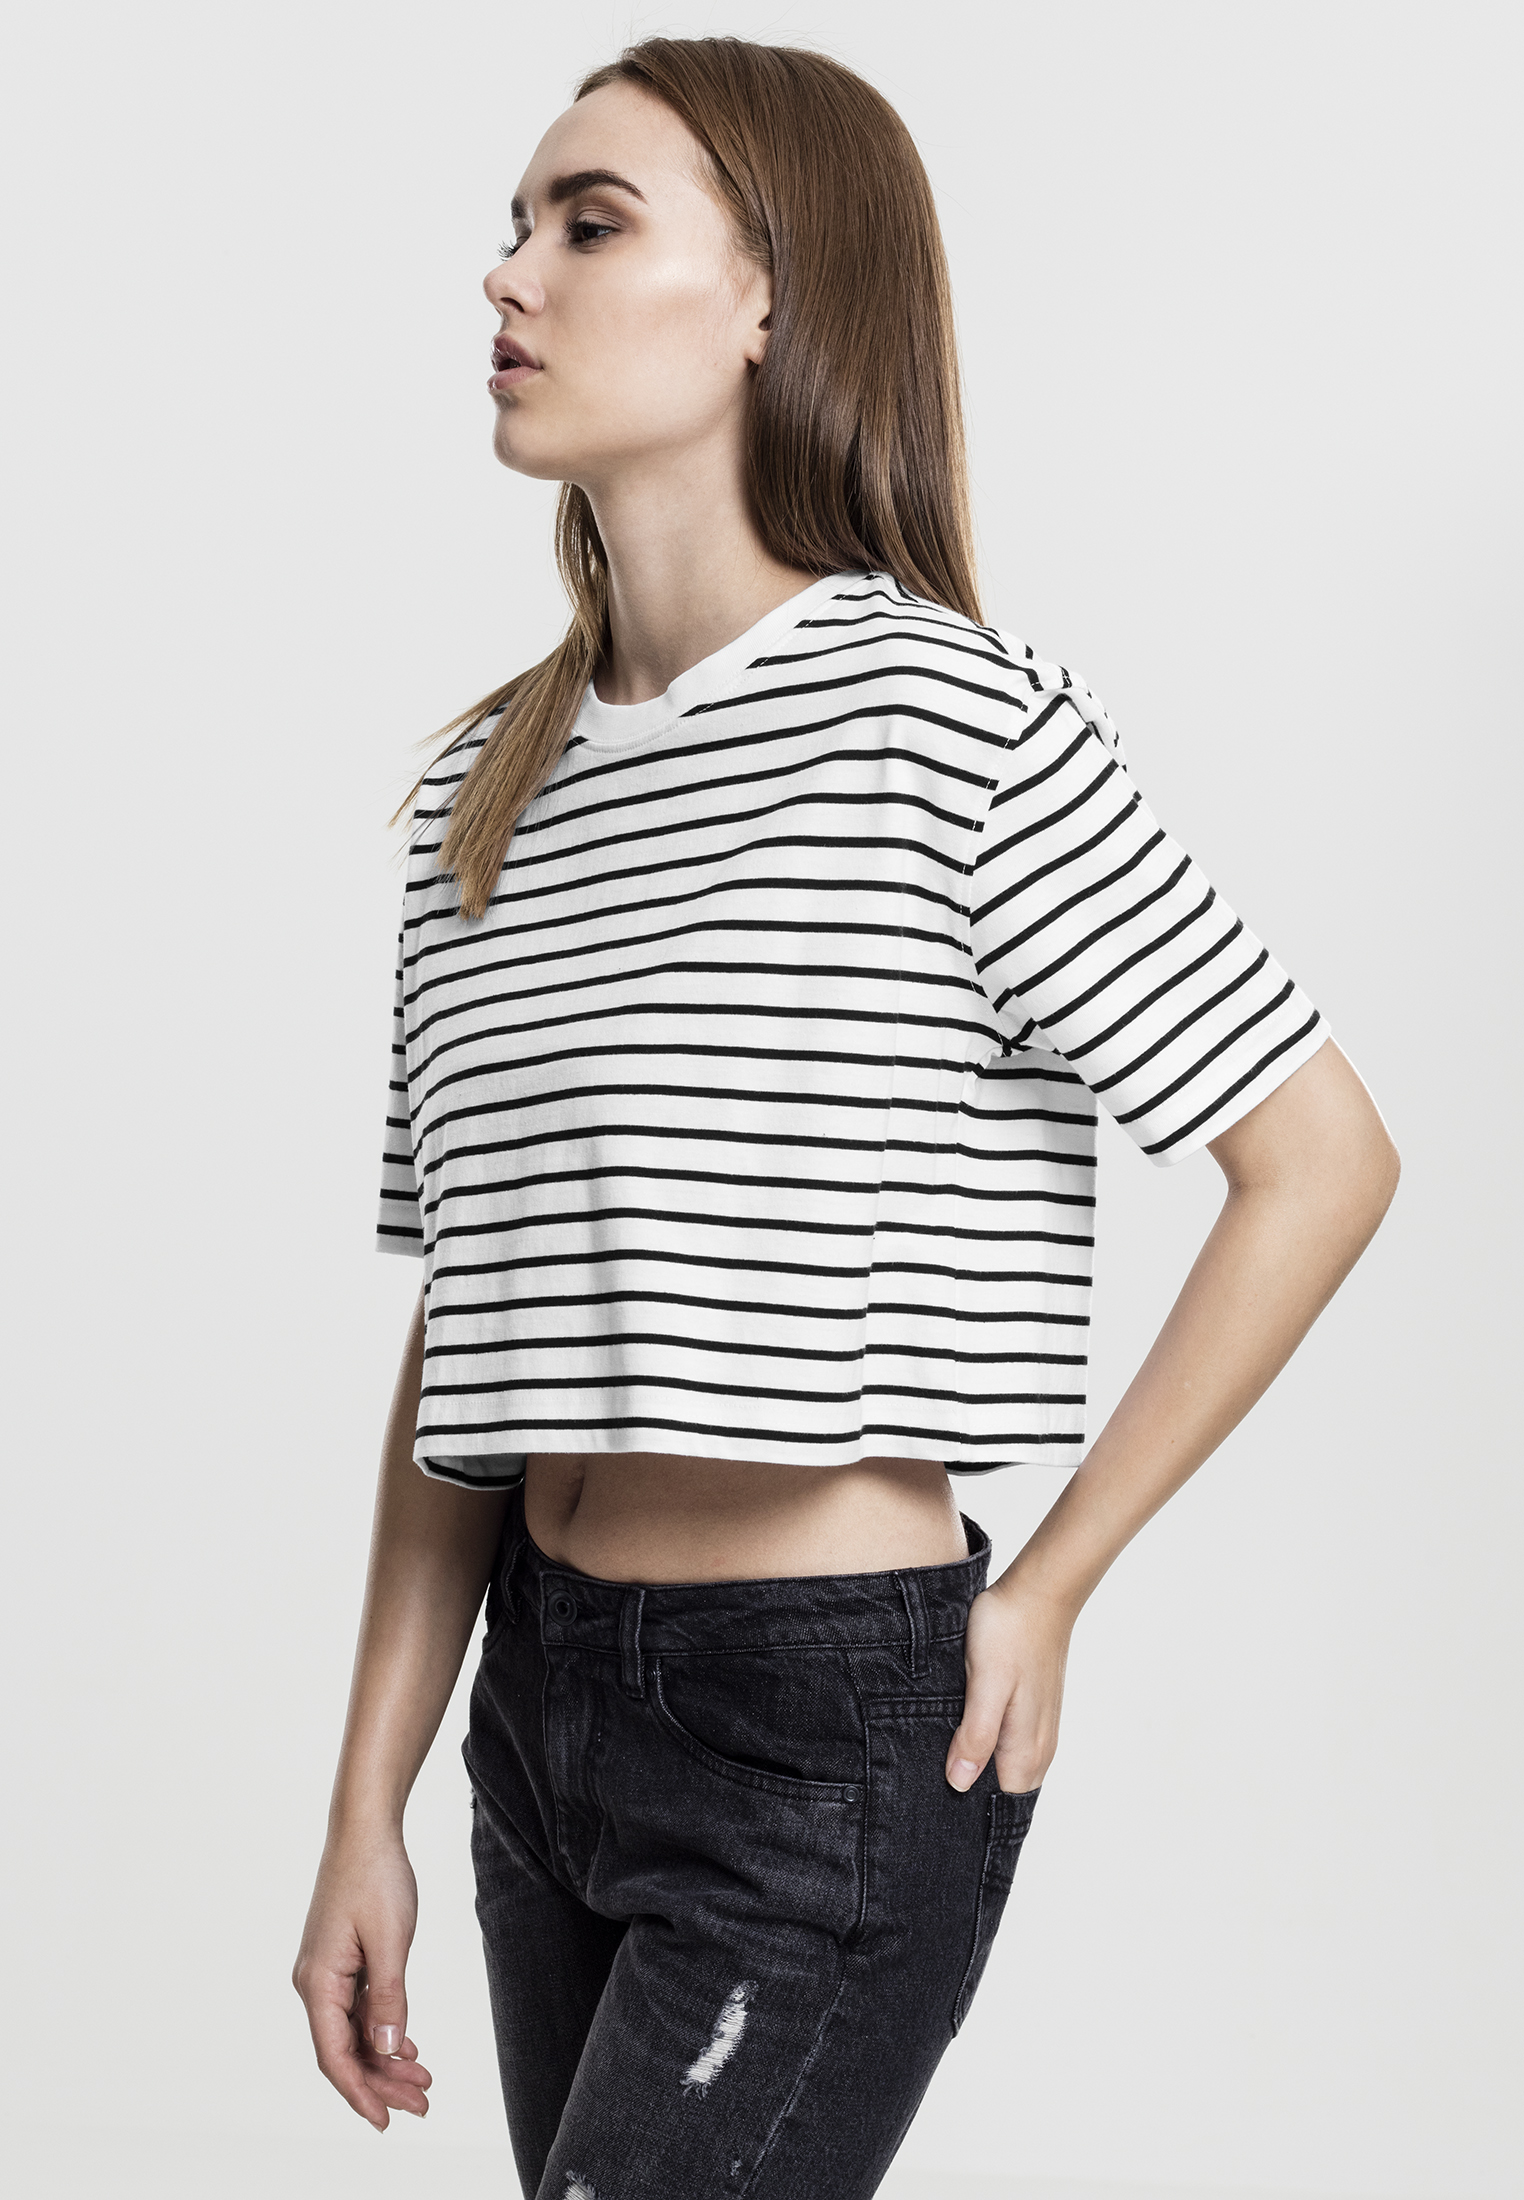 Cropped Tees Ladies Short Striped Oversized Tee in Farbe wht/blk